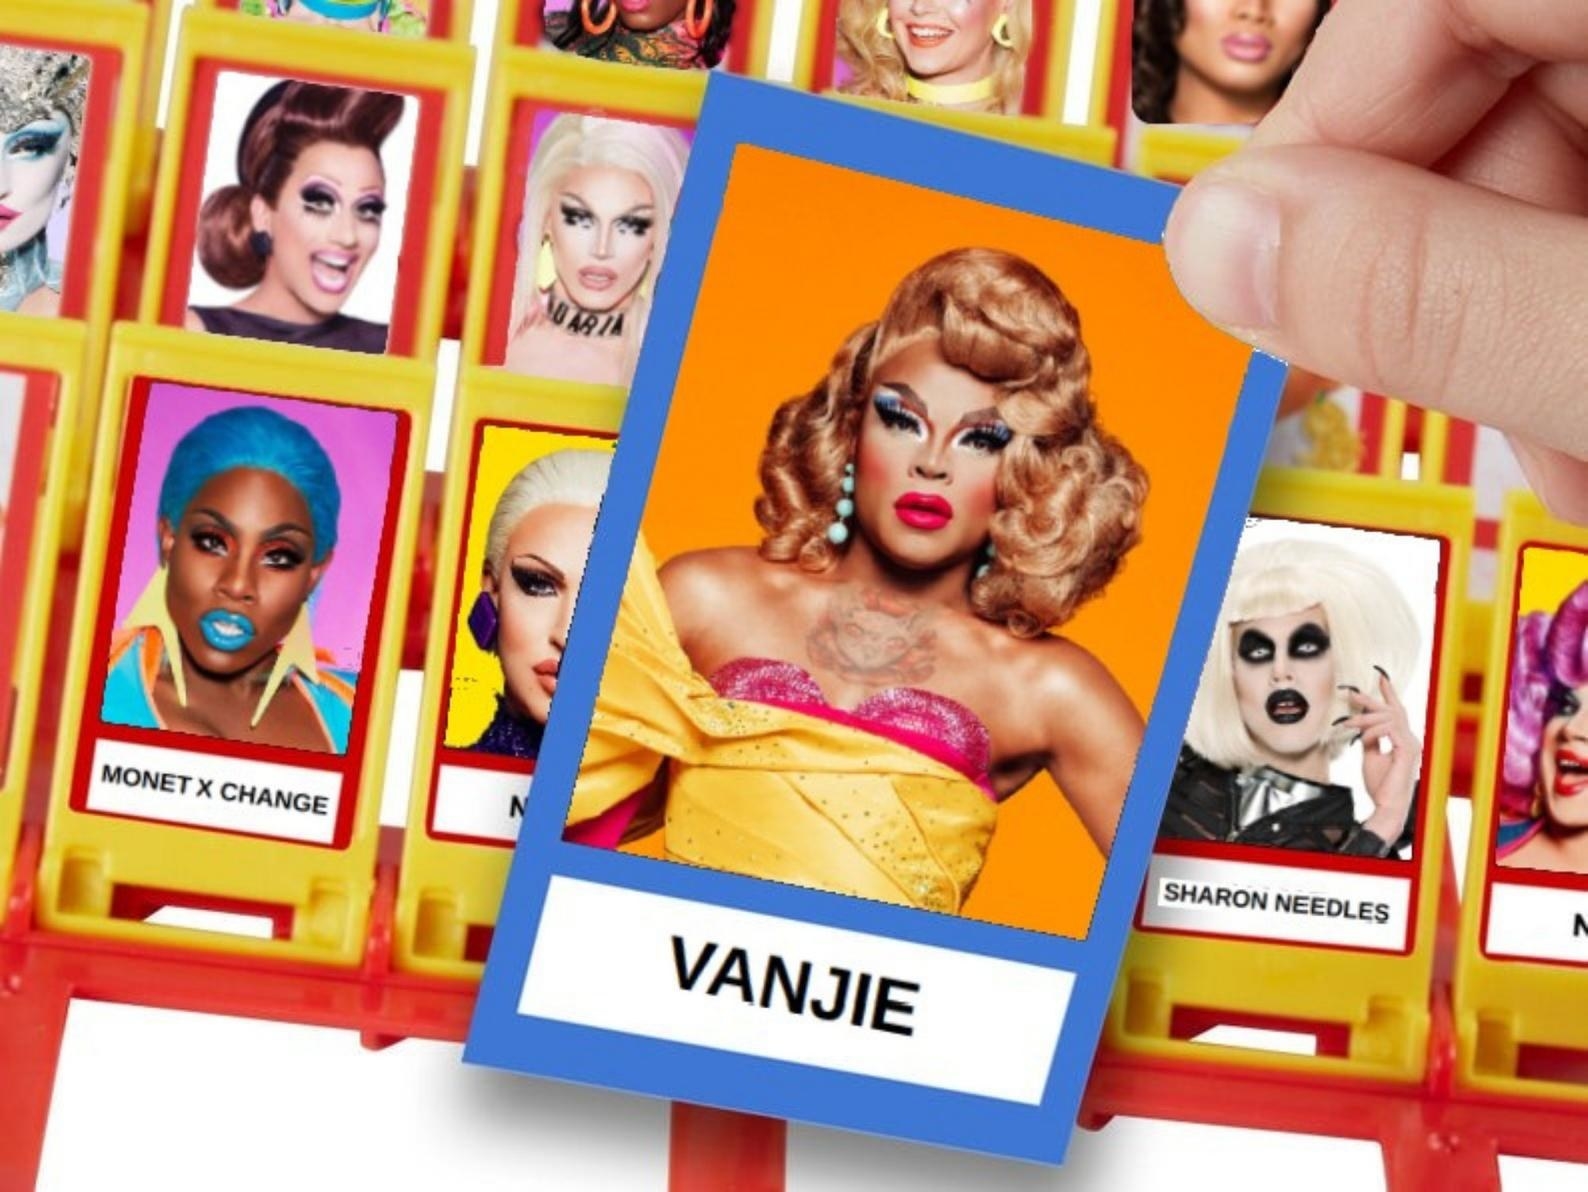 The game where every character is a drag queen from the show